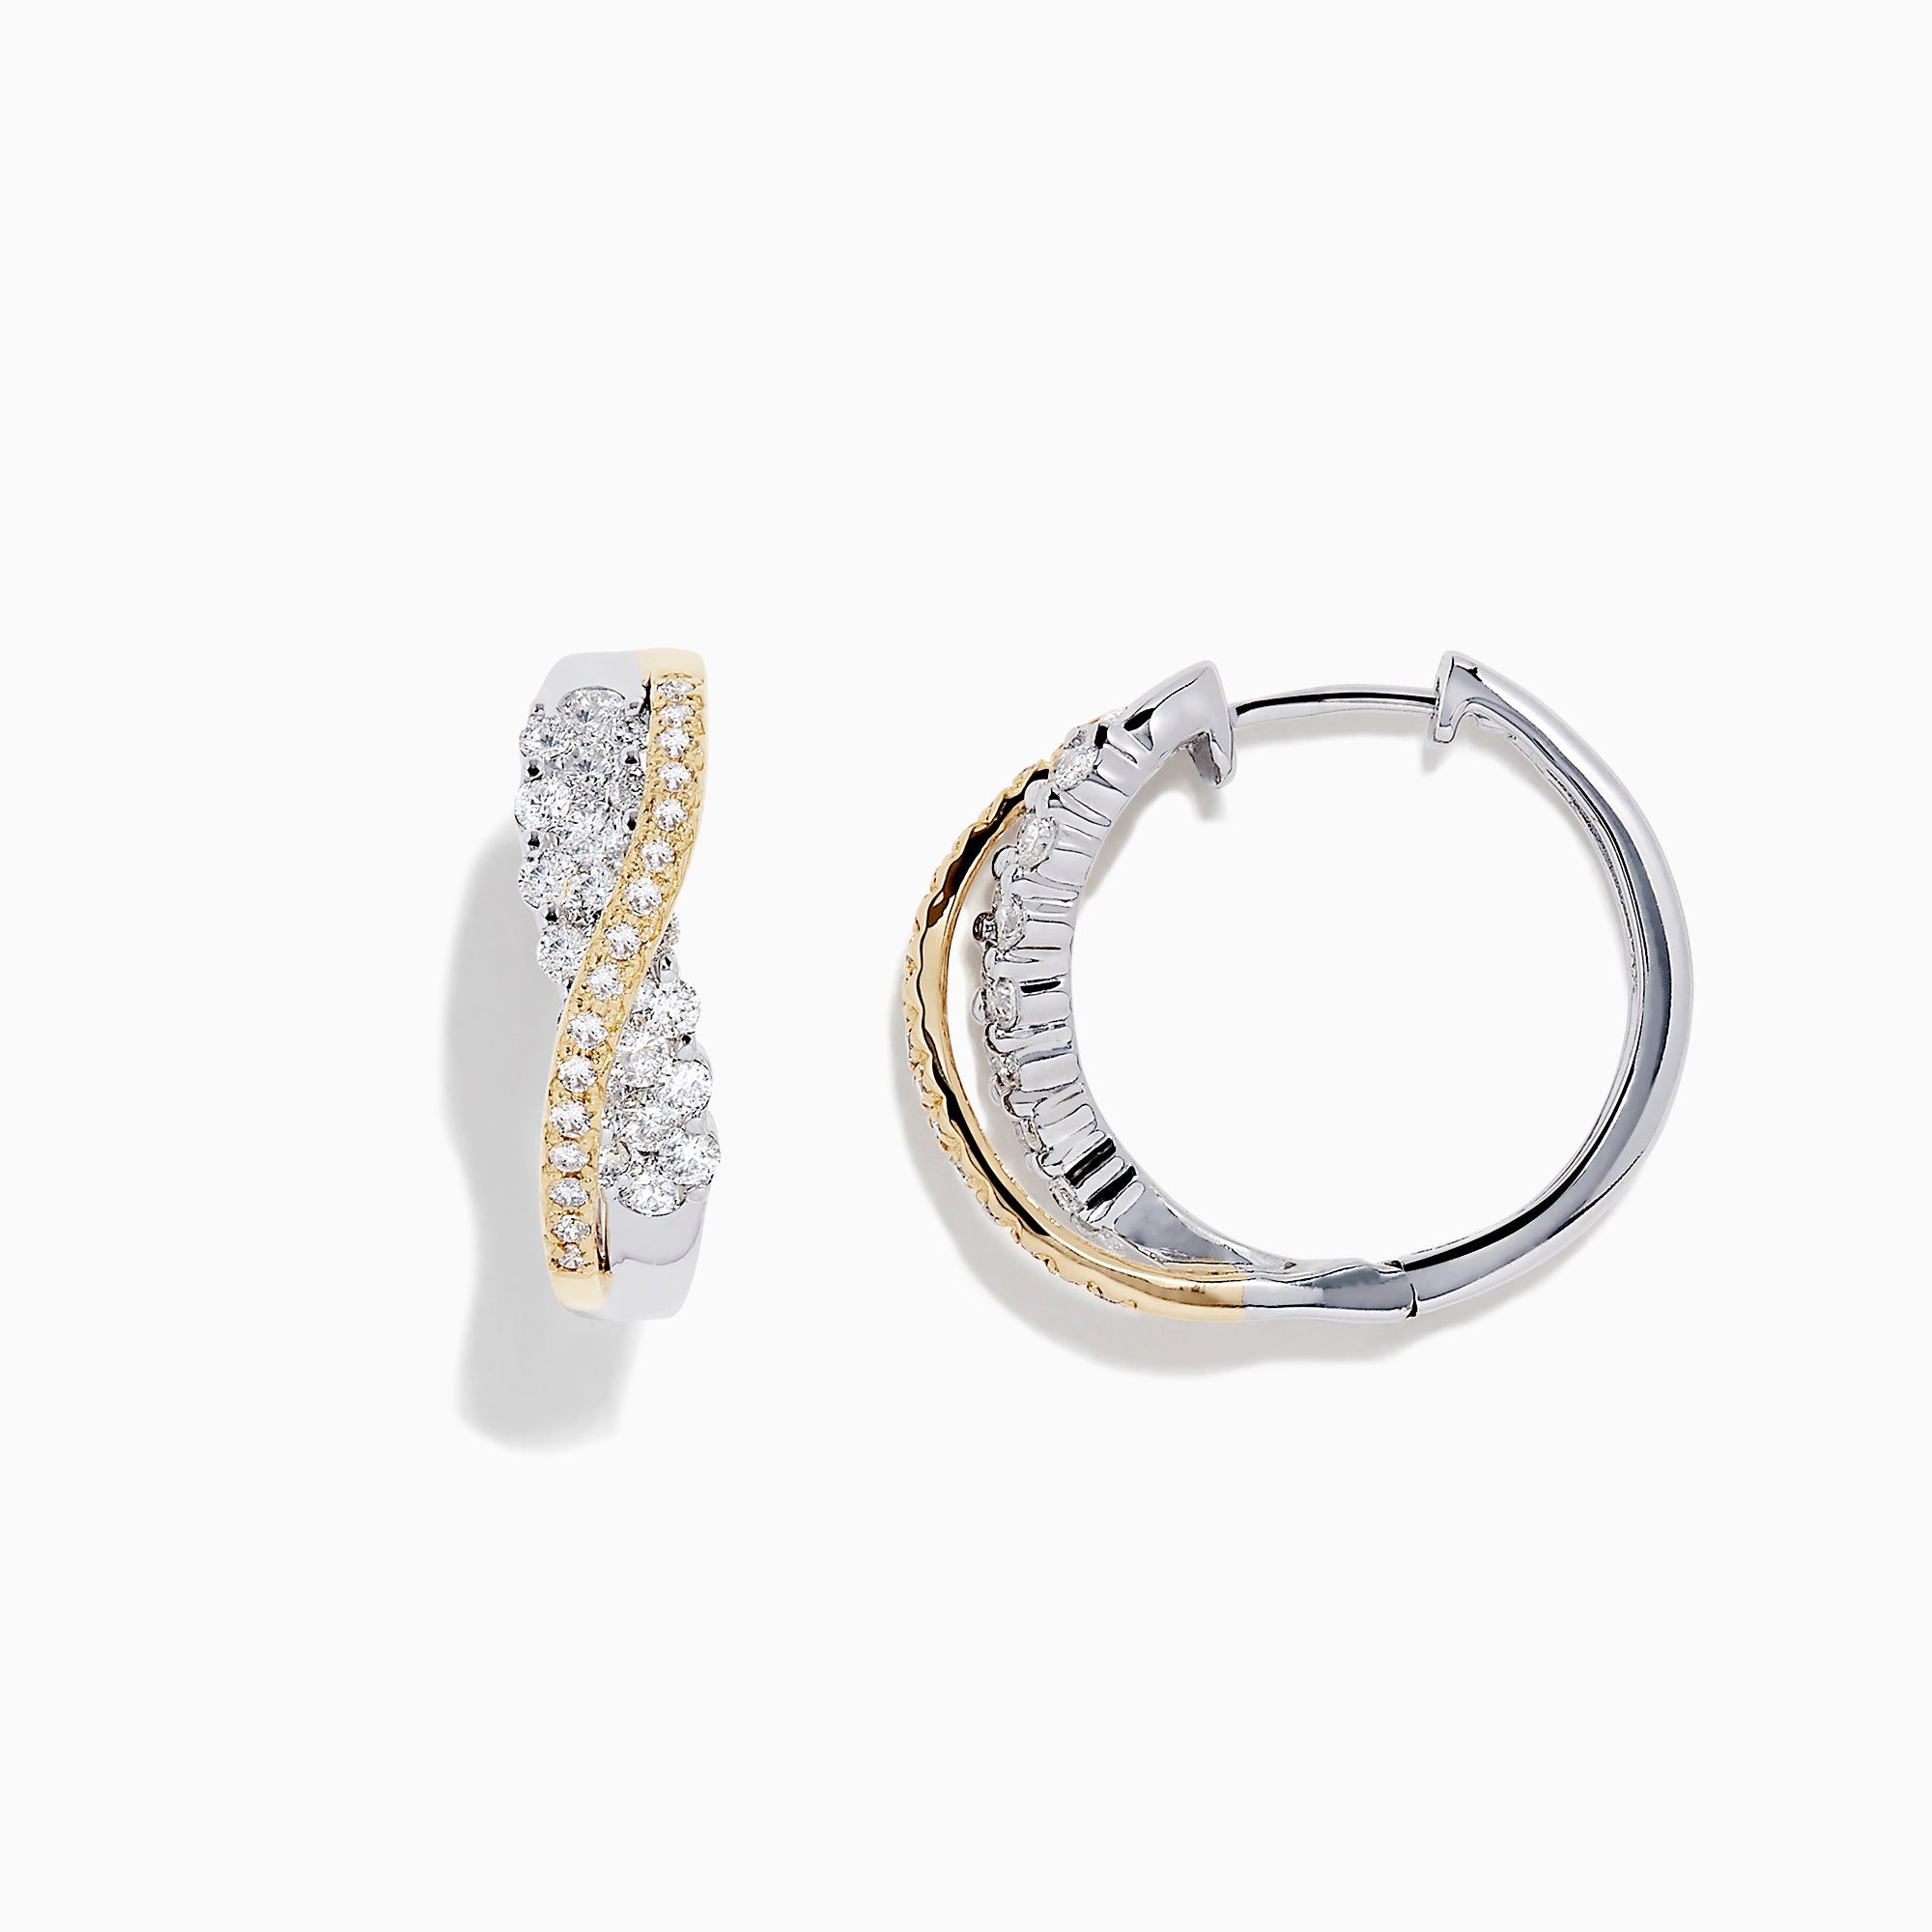 14K White and Yellow Gold Diamond Crossover Hoop Earrings, 1.00 TCW